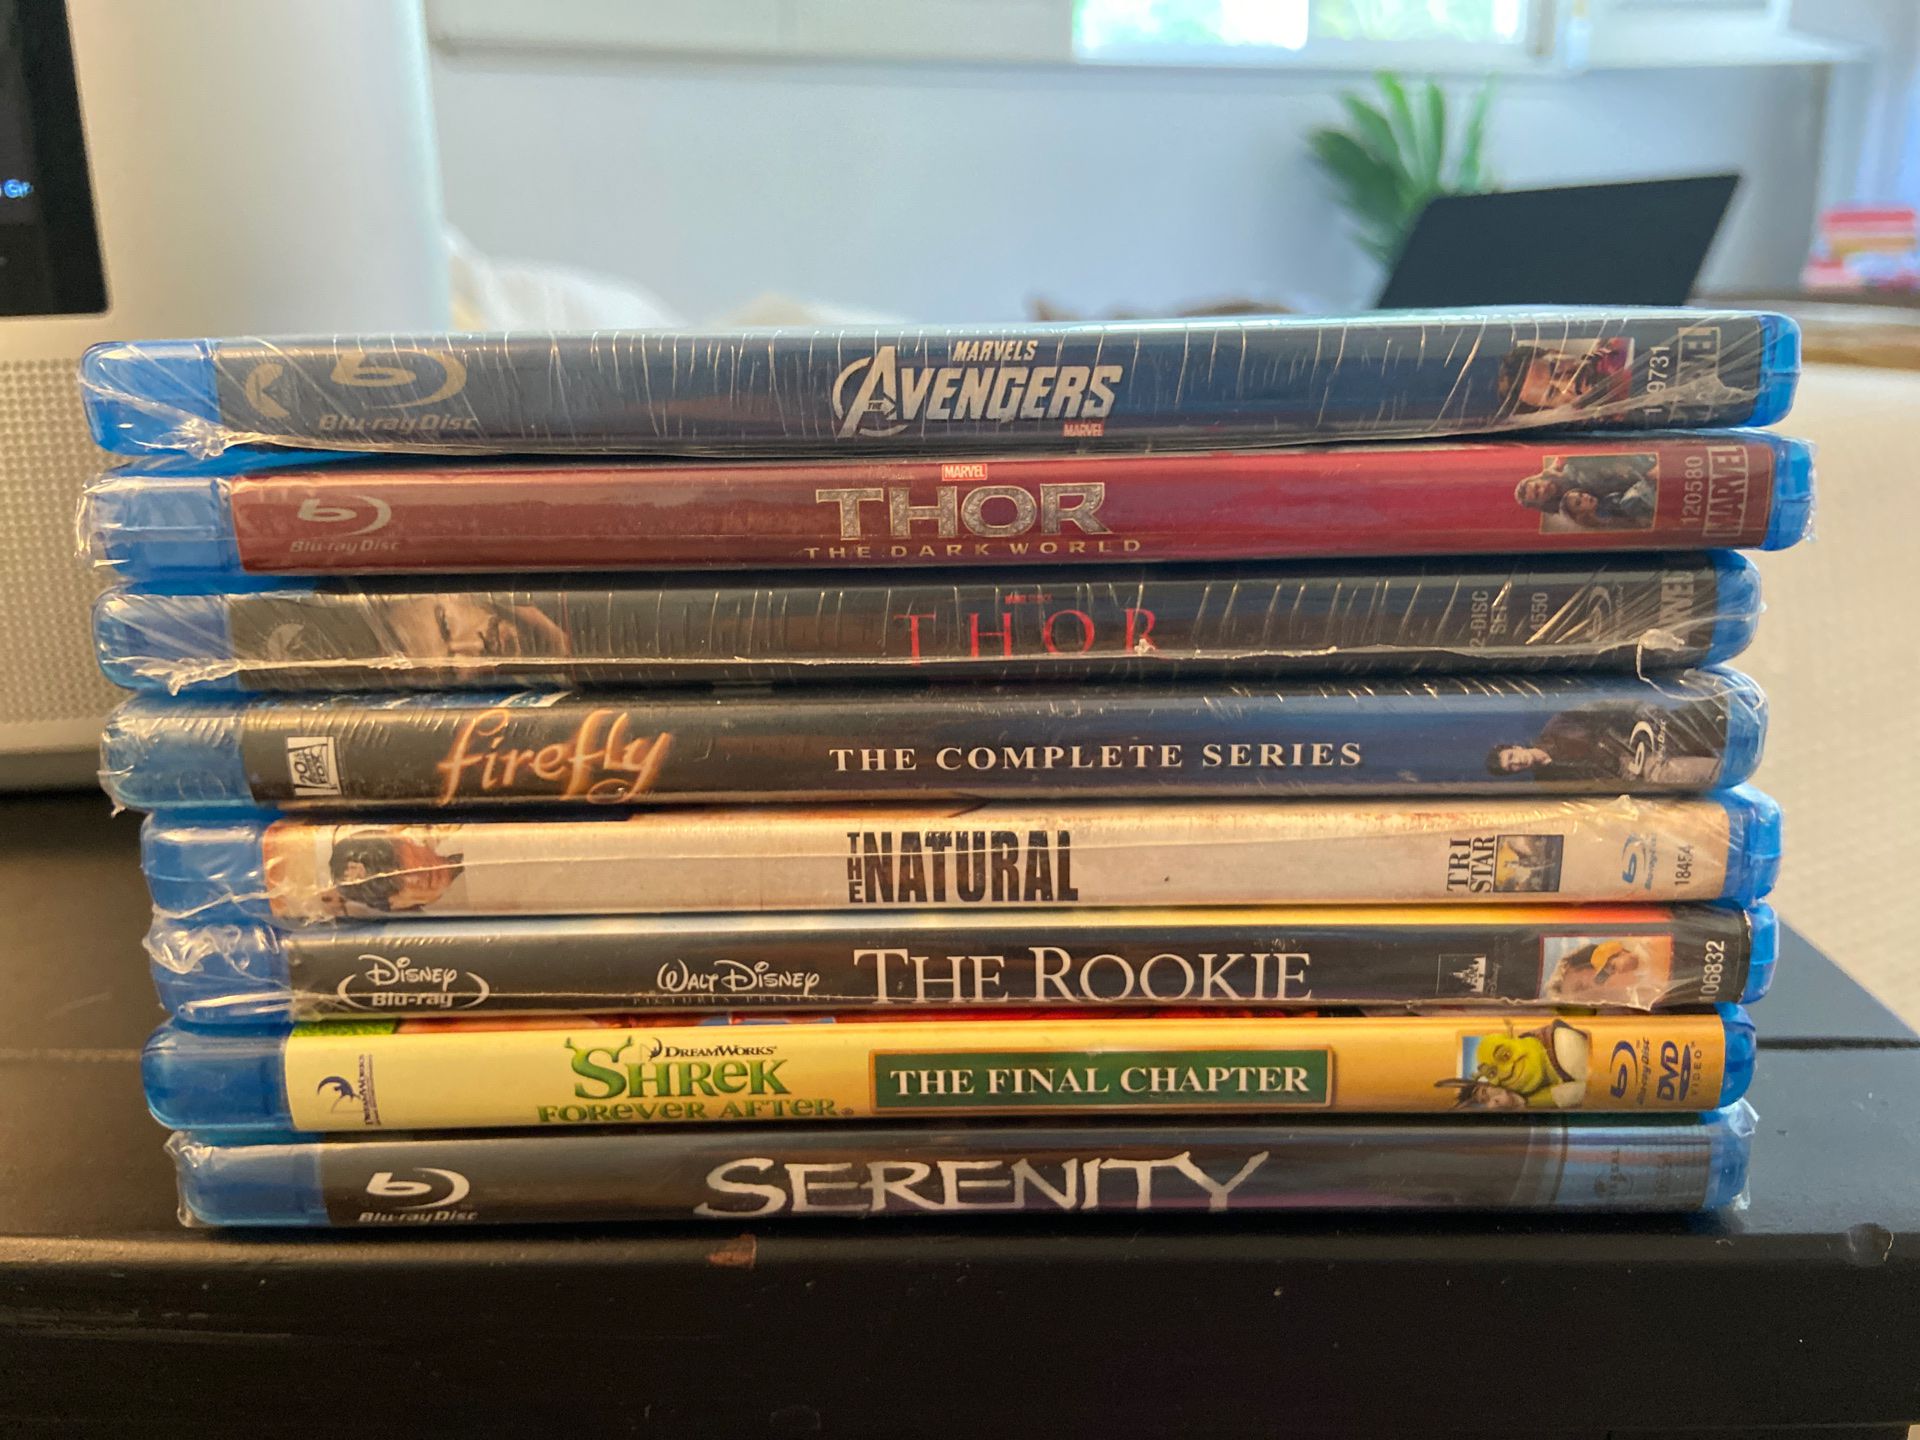 8 Brand new Blu Ray movies—still in package kept in cool, dark container